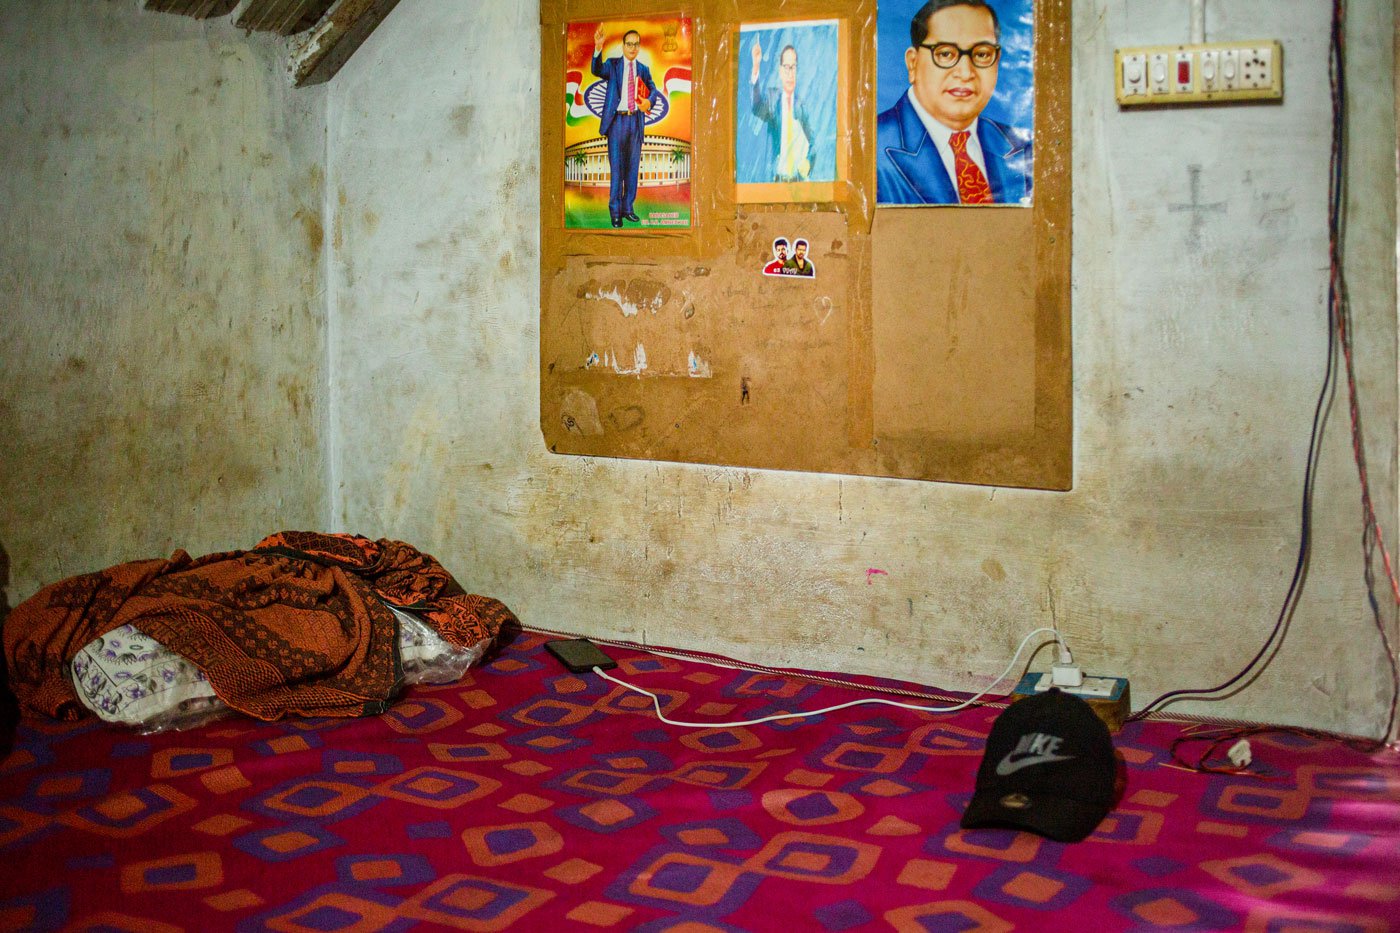 Raja says Akash was particularly fond of  Dr. B.R. Ambedkar. 'He had hung his [Ambedkar’s] portrait [near his bed] so that he would be the first image to see when he woke up'